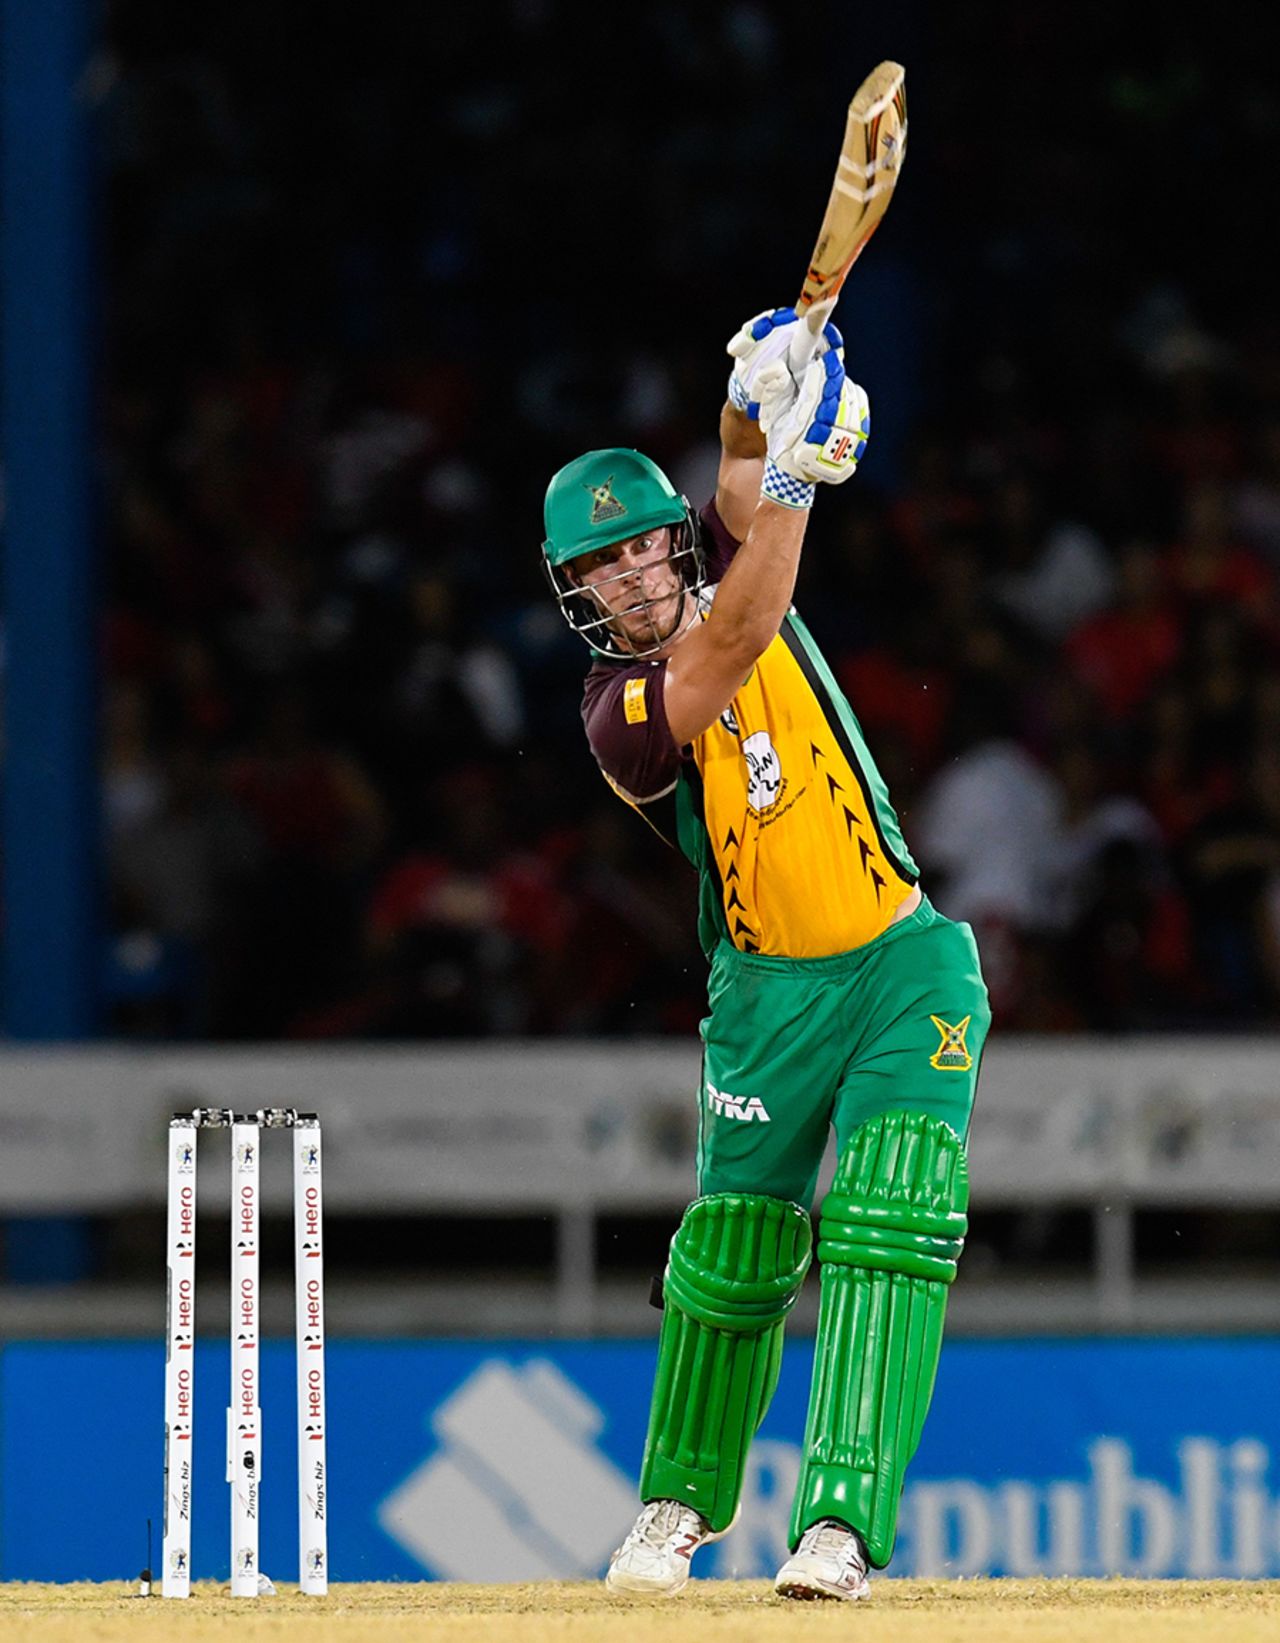 Chris Lynn hits out straight down the ground, Trinbago Knight Riders v Guyana Amazon Warriors, CPL 2016, Port of Spain, July 2, 2016